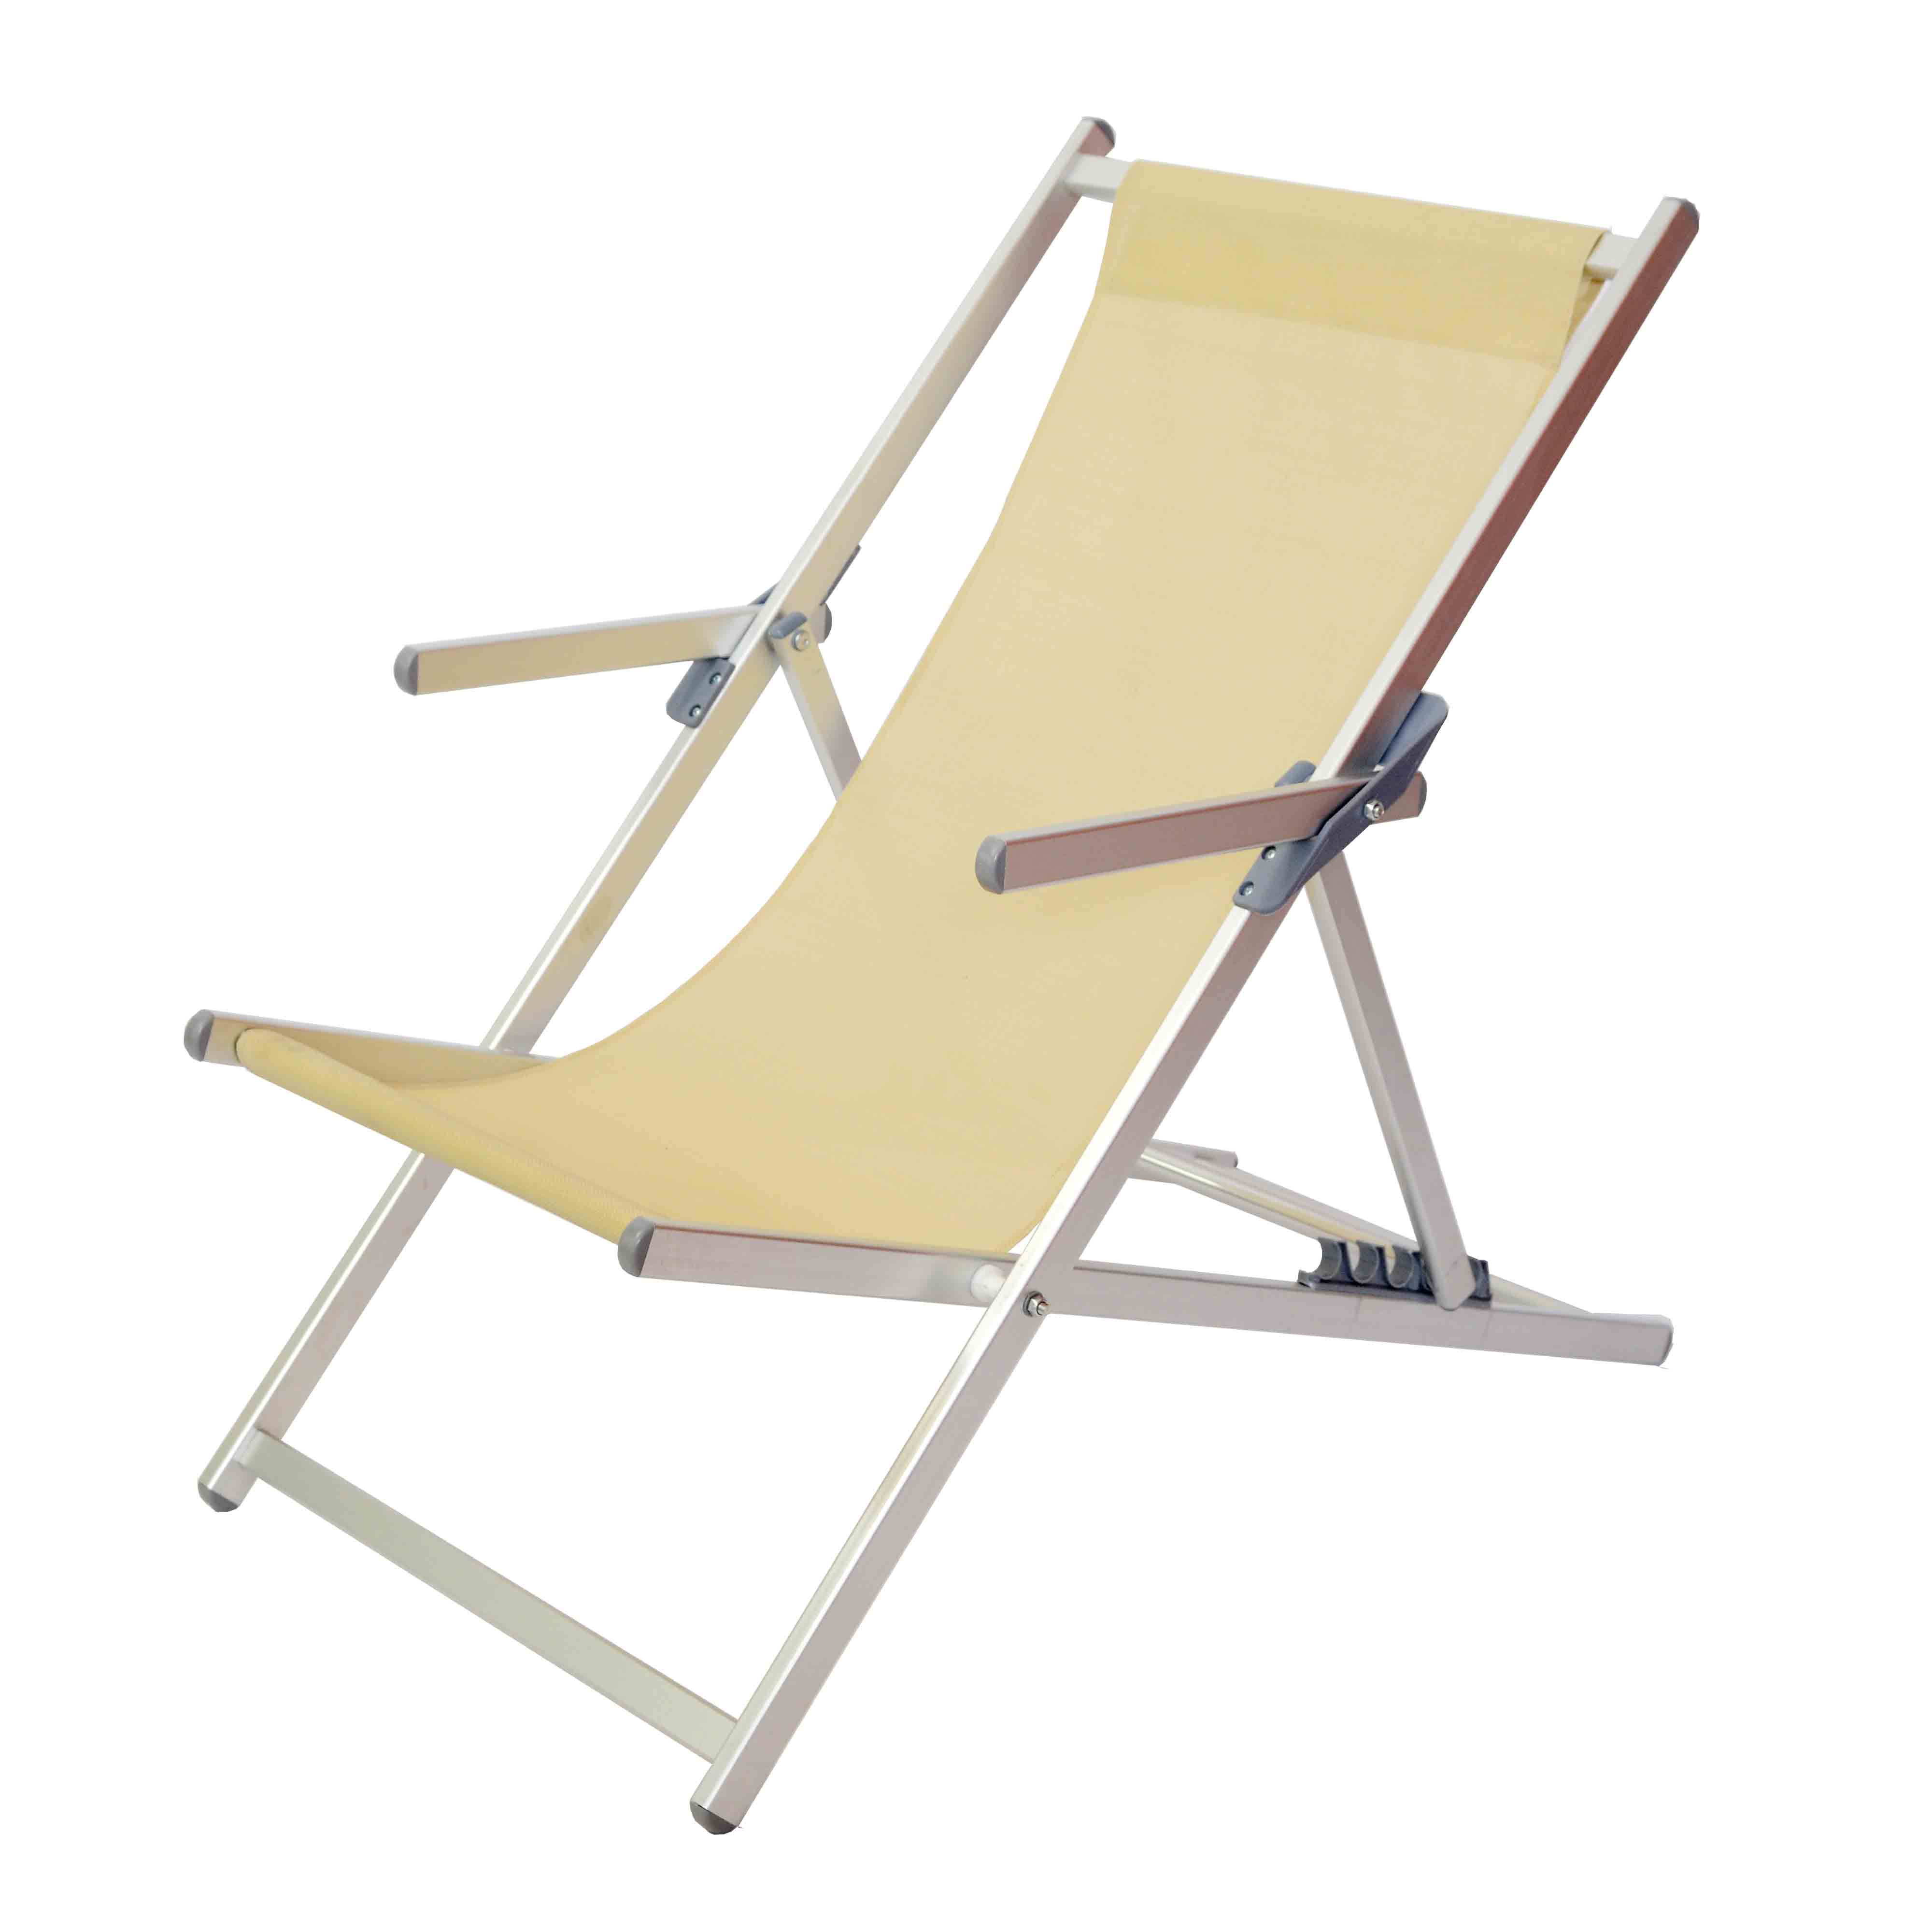 Best Price on Hand-Make Leisure Chair - JJLXS-036 Aluminum camping folding chair – Jin-jiang Industry